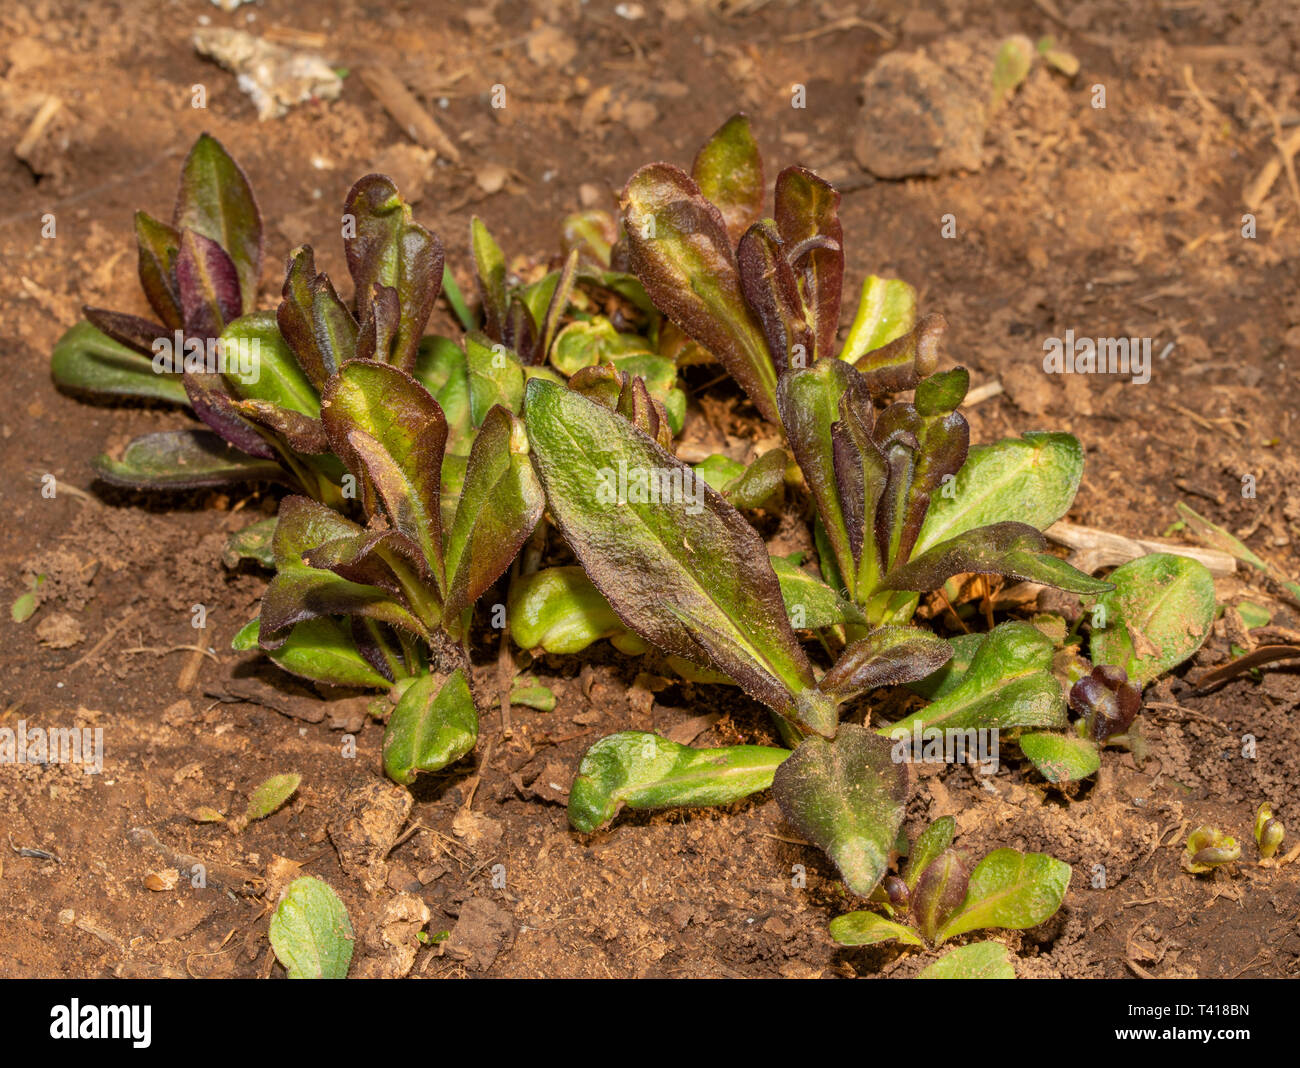 Perennial Tall Phlox new growth pushing out of ground in early spring Stock Photo